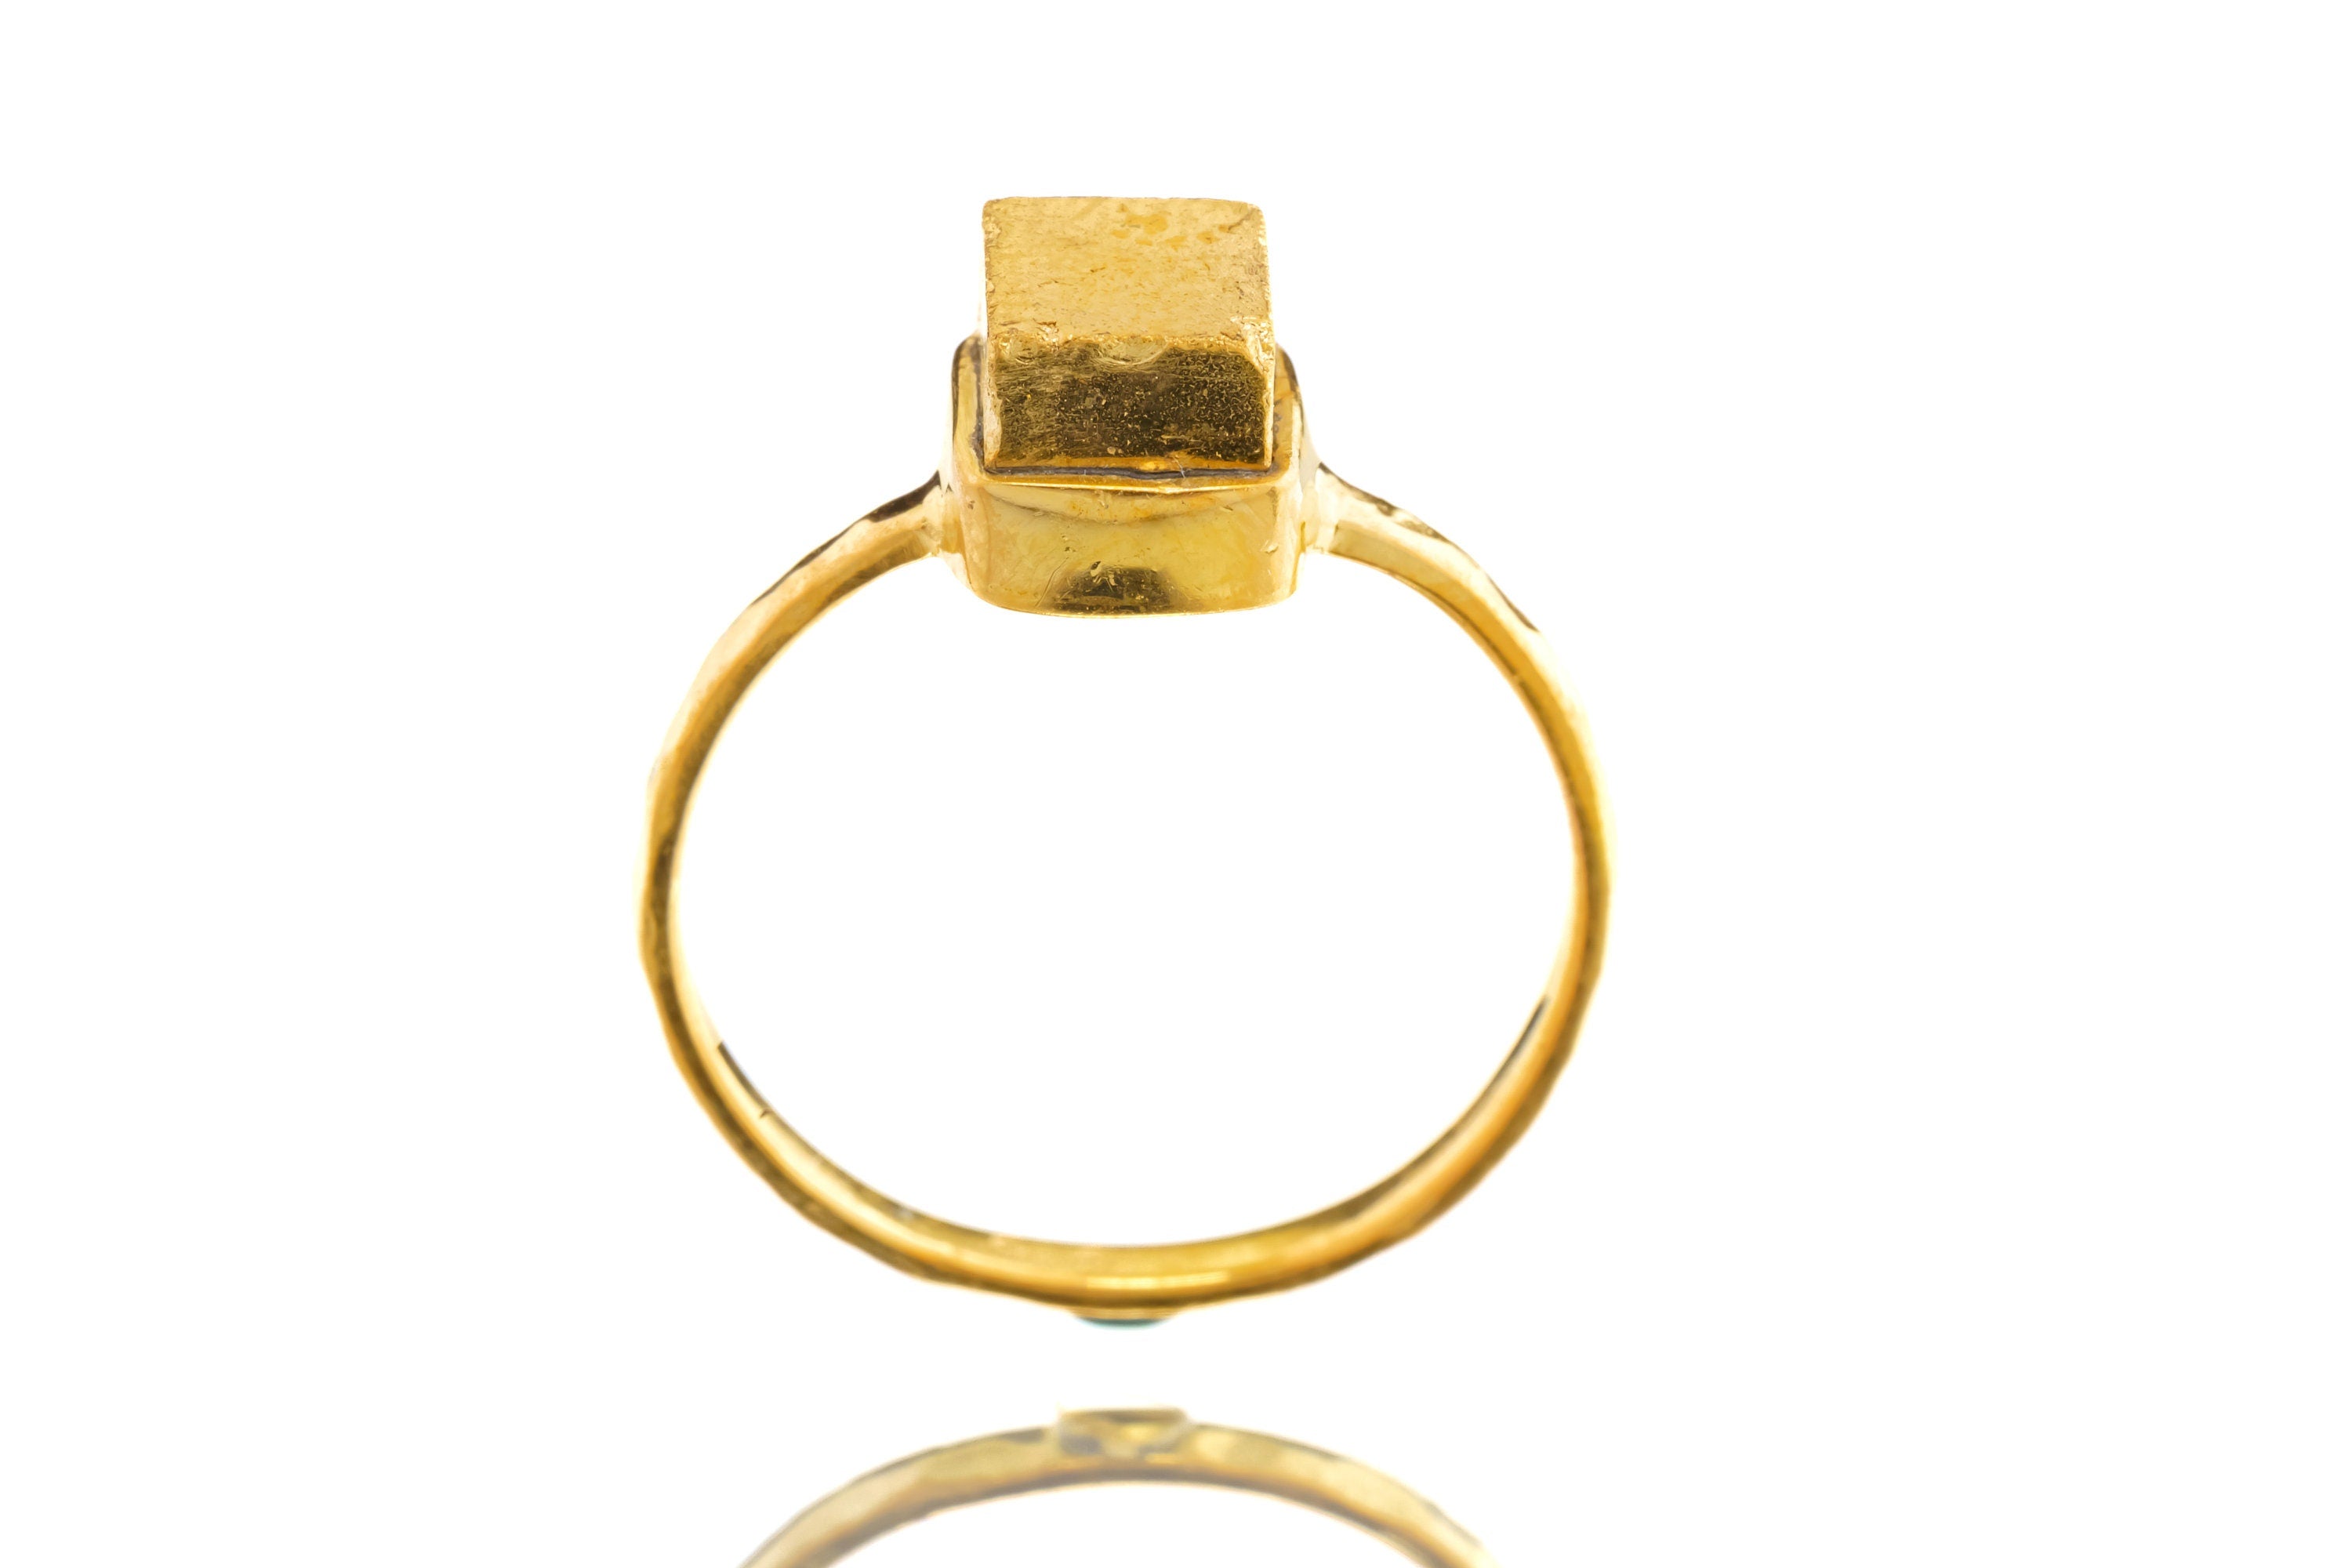 Gold Coated Australian Cubic Pyrite - Stack Crystal Ring - Size 5 1/2 US - Gold Plated 925 Sterling Silver - Thin Band Hammer Textured